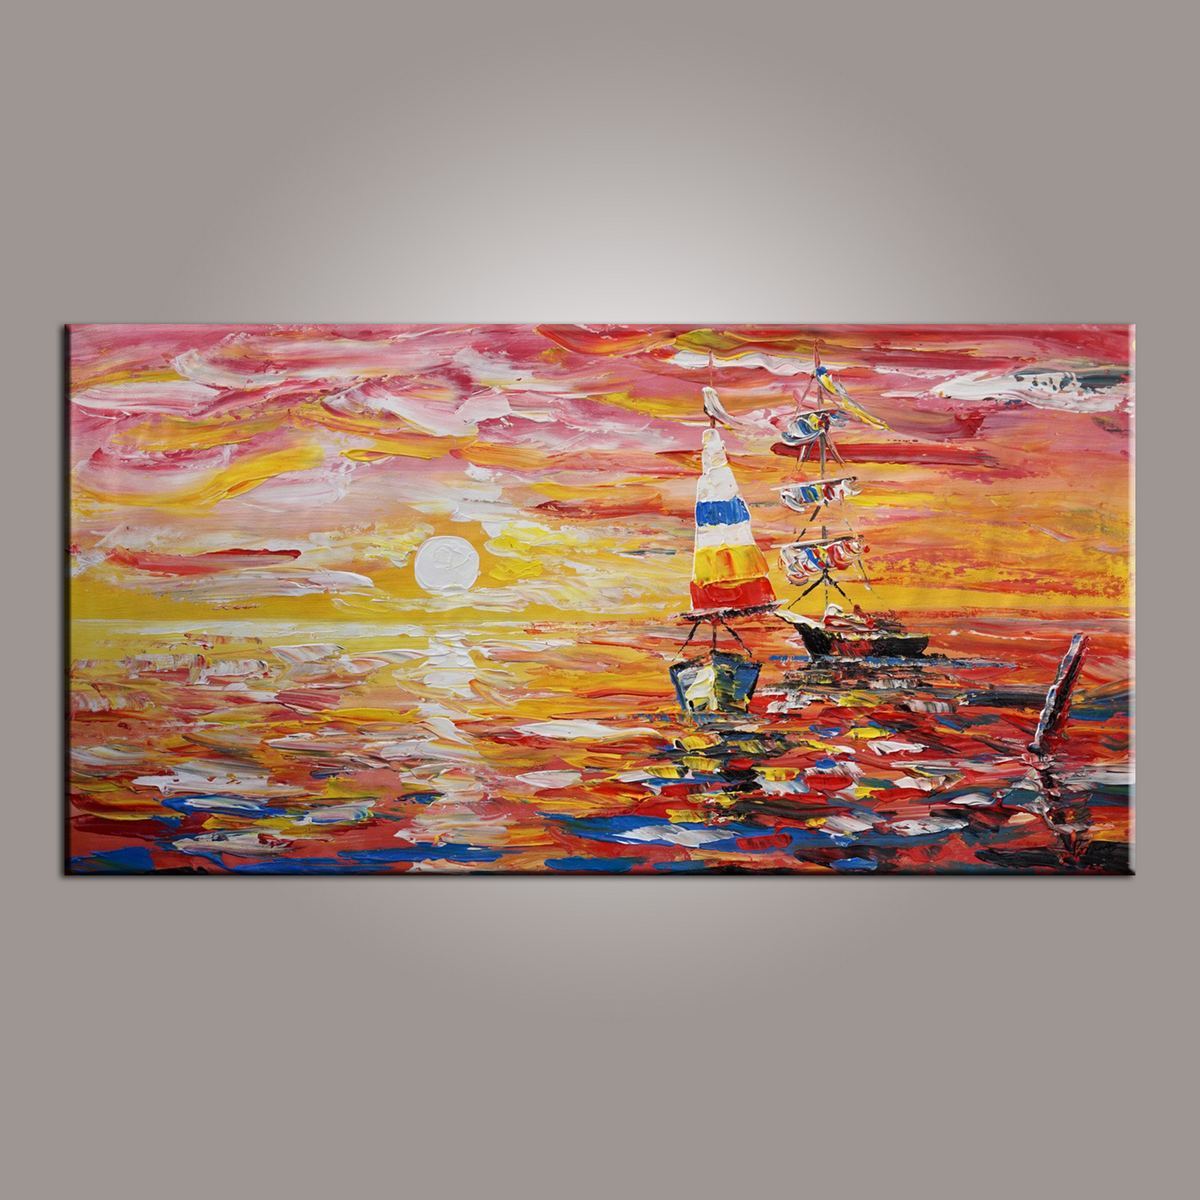 Contemporary Art, Boat Painting, Modern Art, Art Painting, Abstract Art, Living Room Wall Art, Canvas Art, Art for Sale-Silvia Home Craft